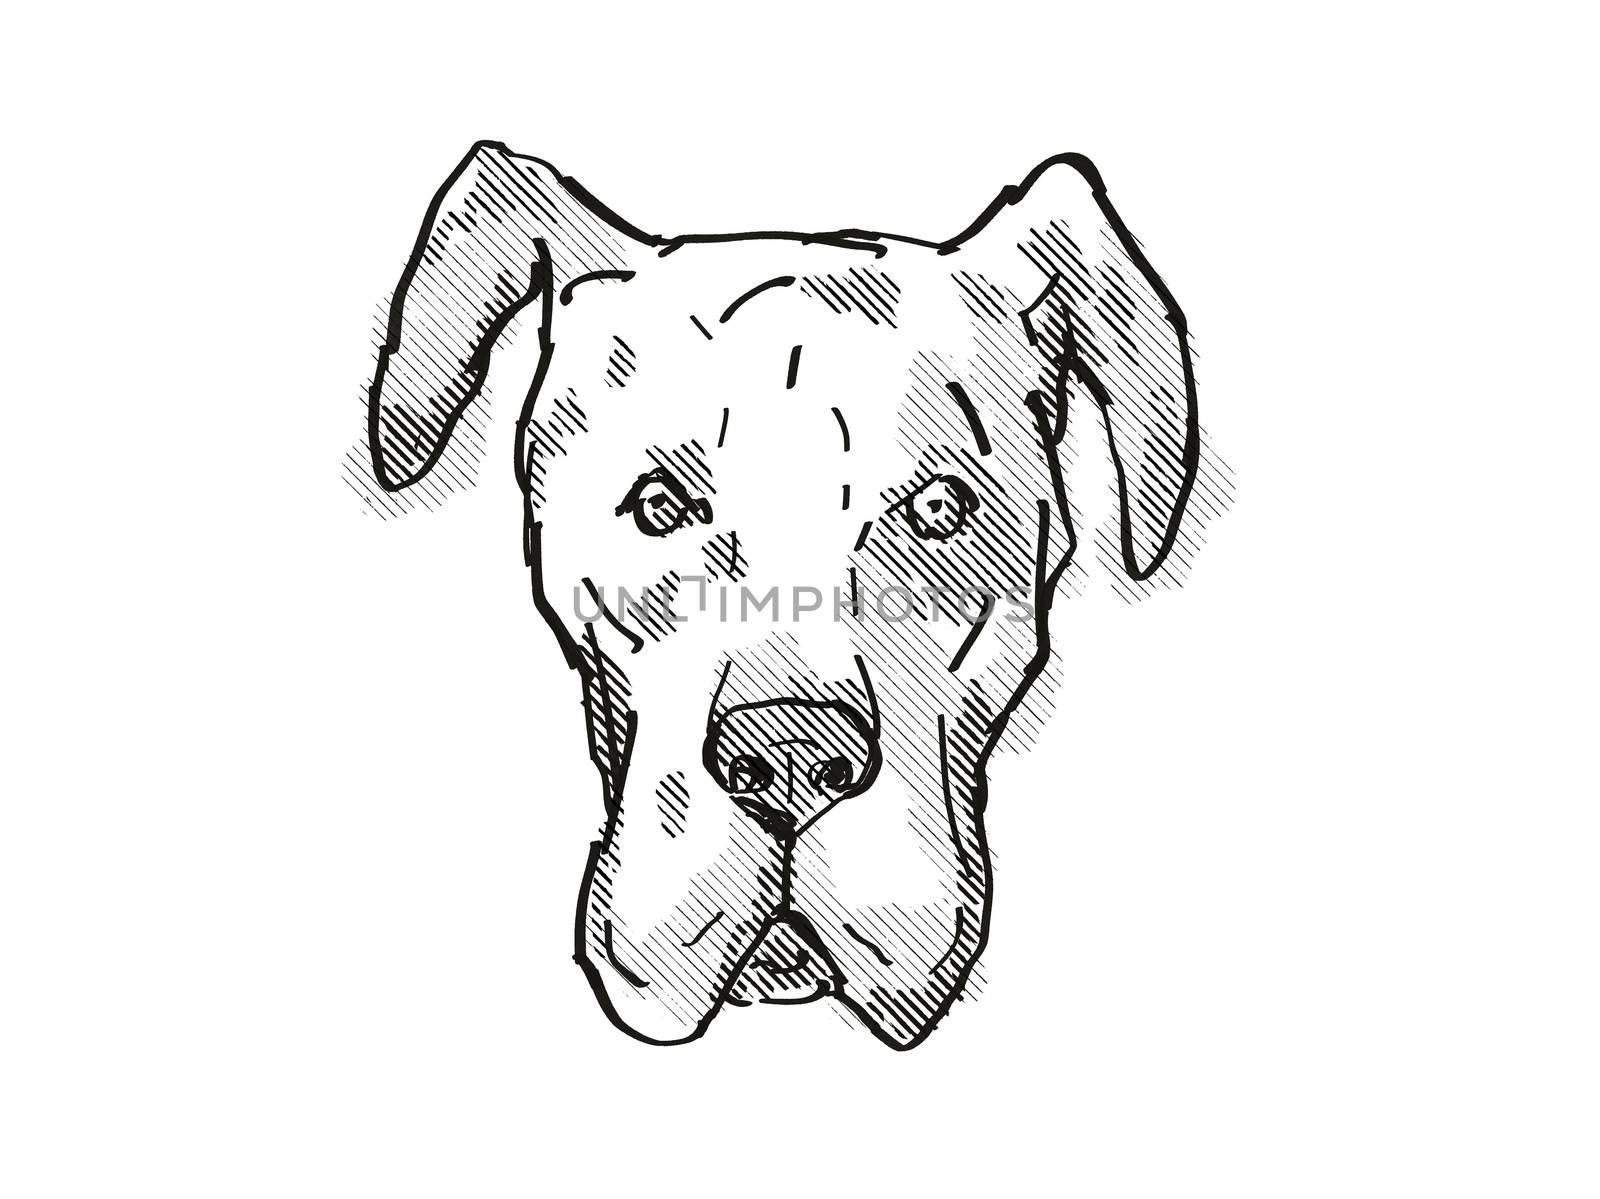 Retro cartoon style drawing of head of a Great Dane, a domestic dog or canine breed on isolated white background done in black and white.